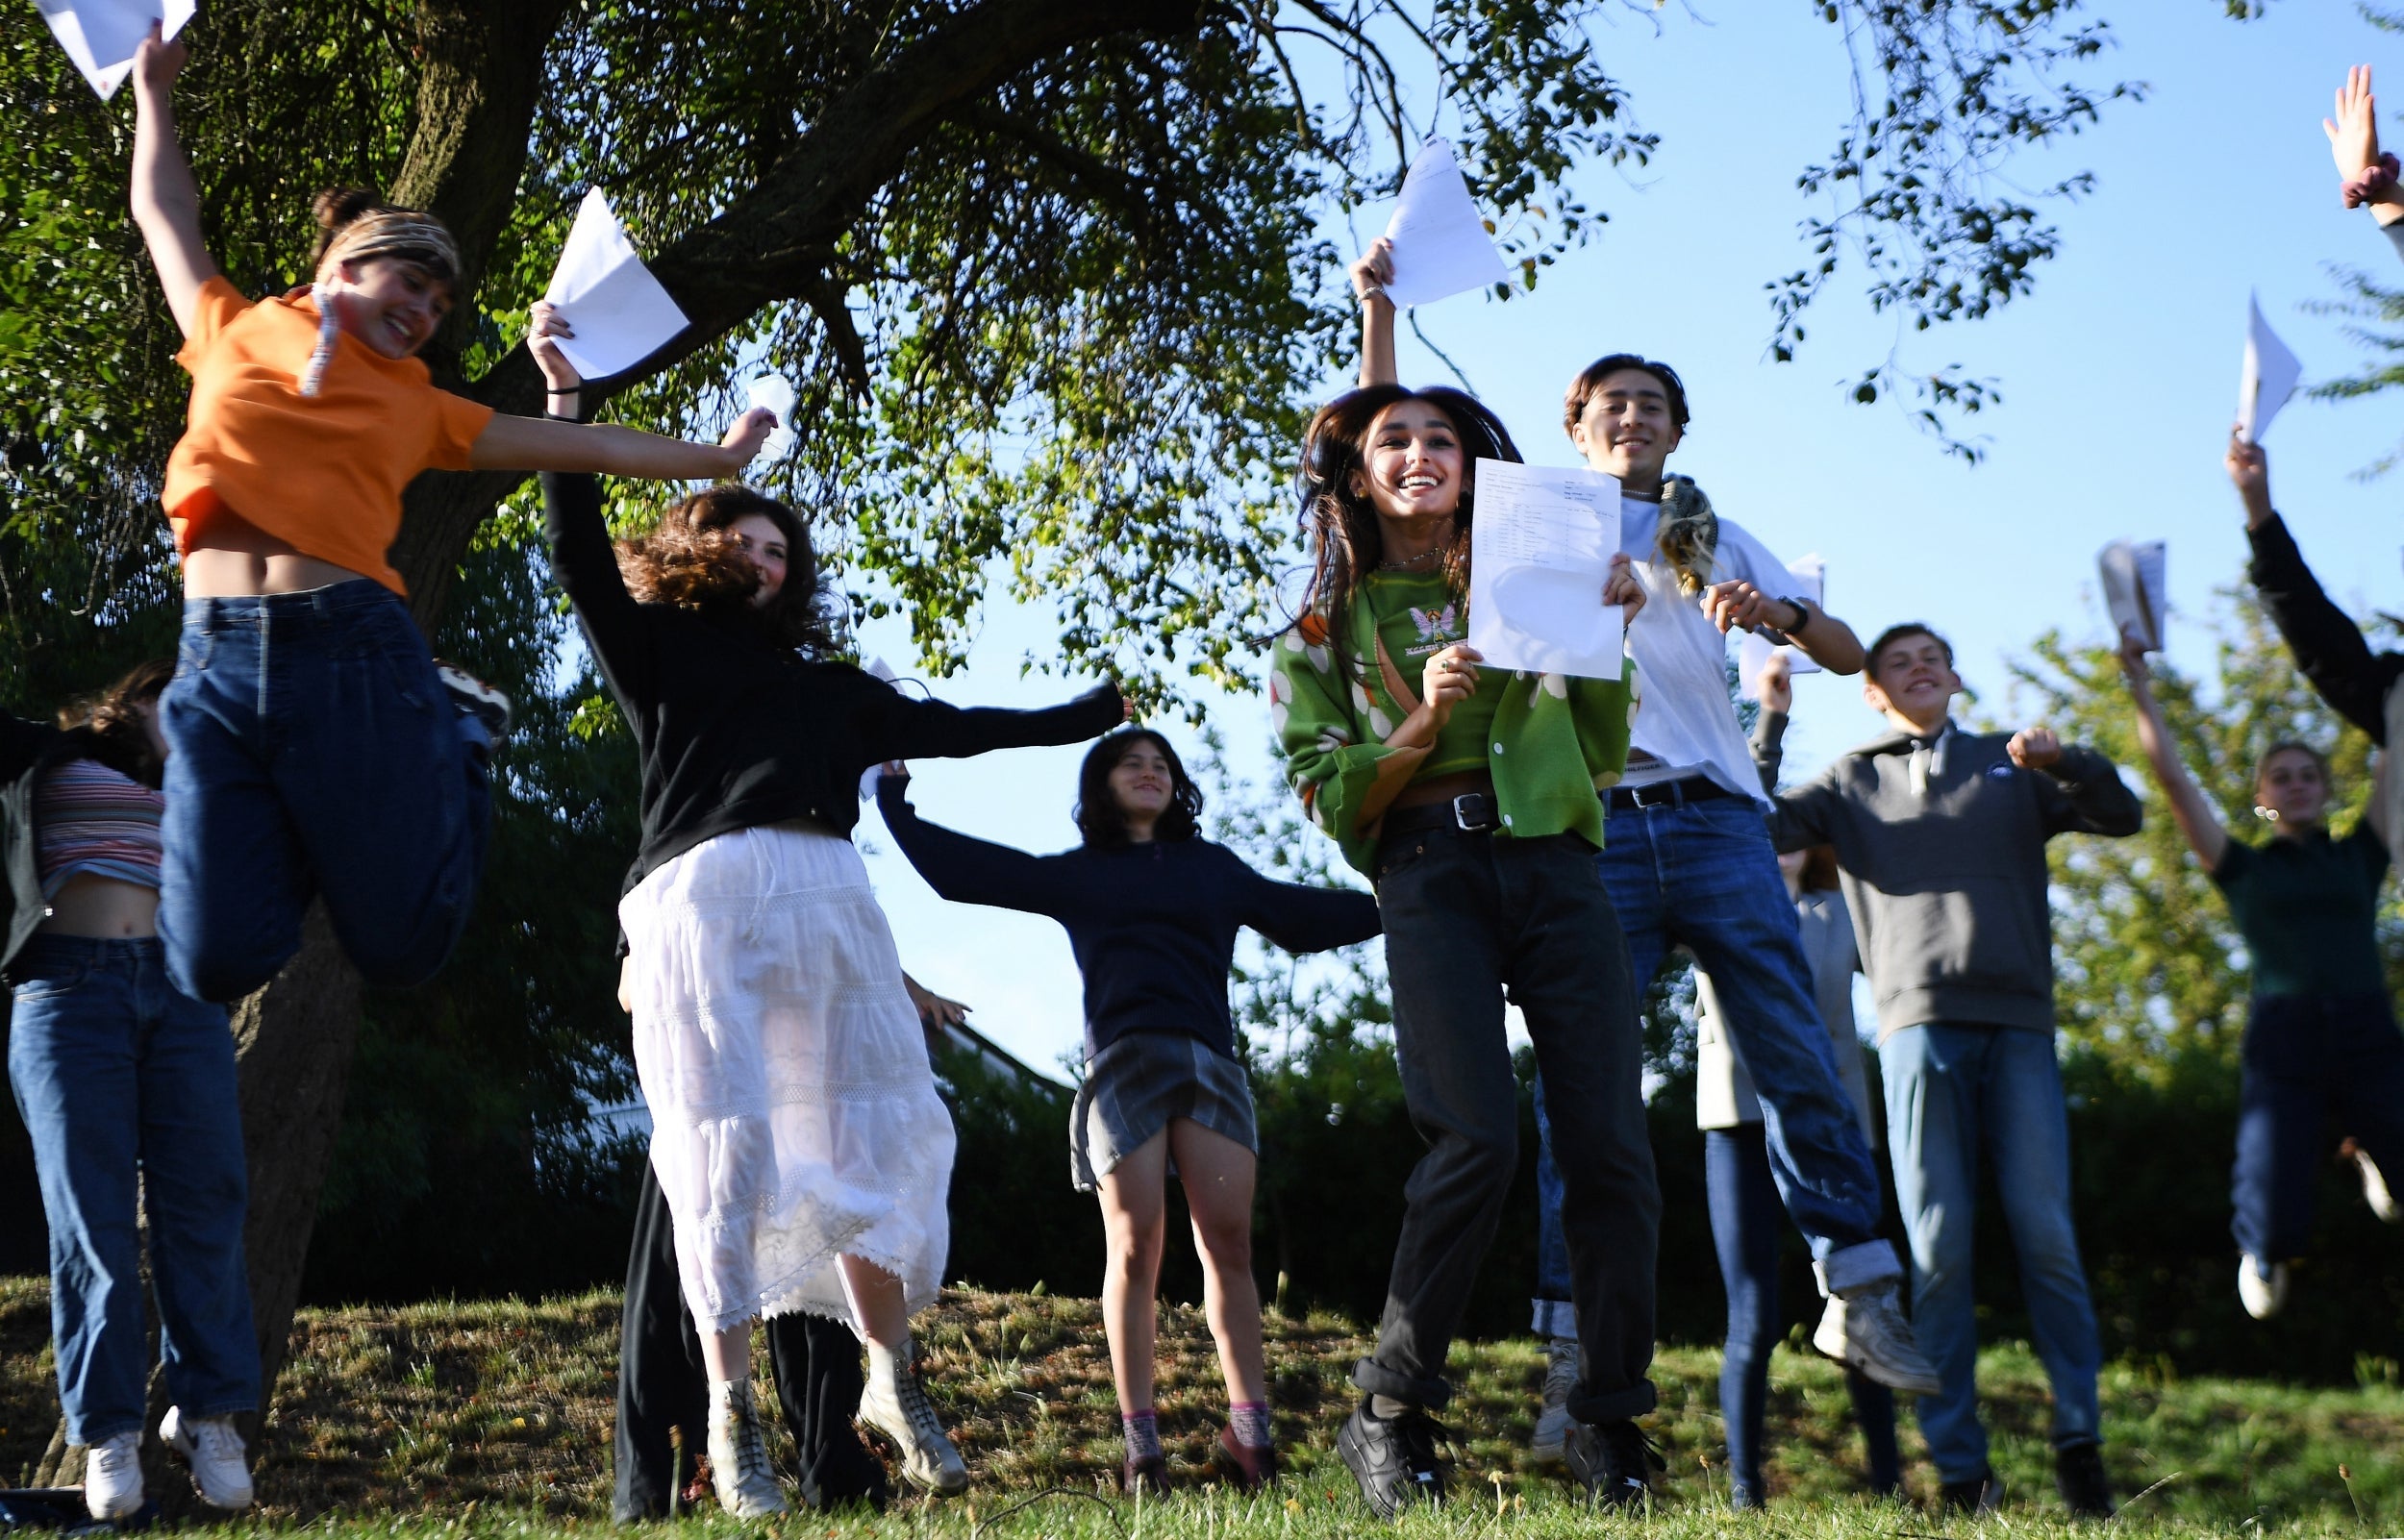 Secondary school students celebrate their GCSE results on Thursday